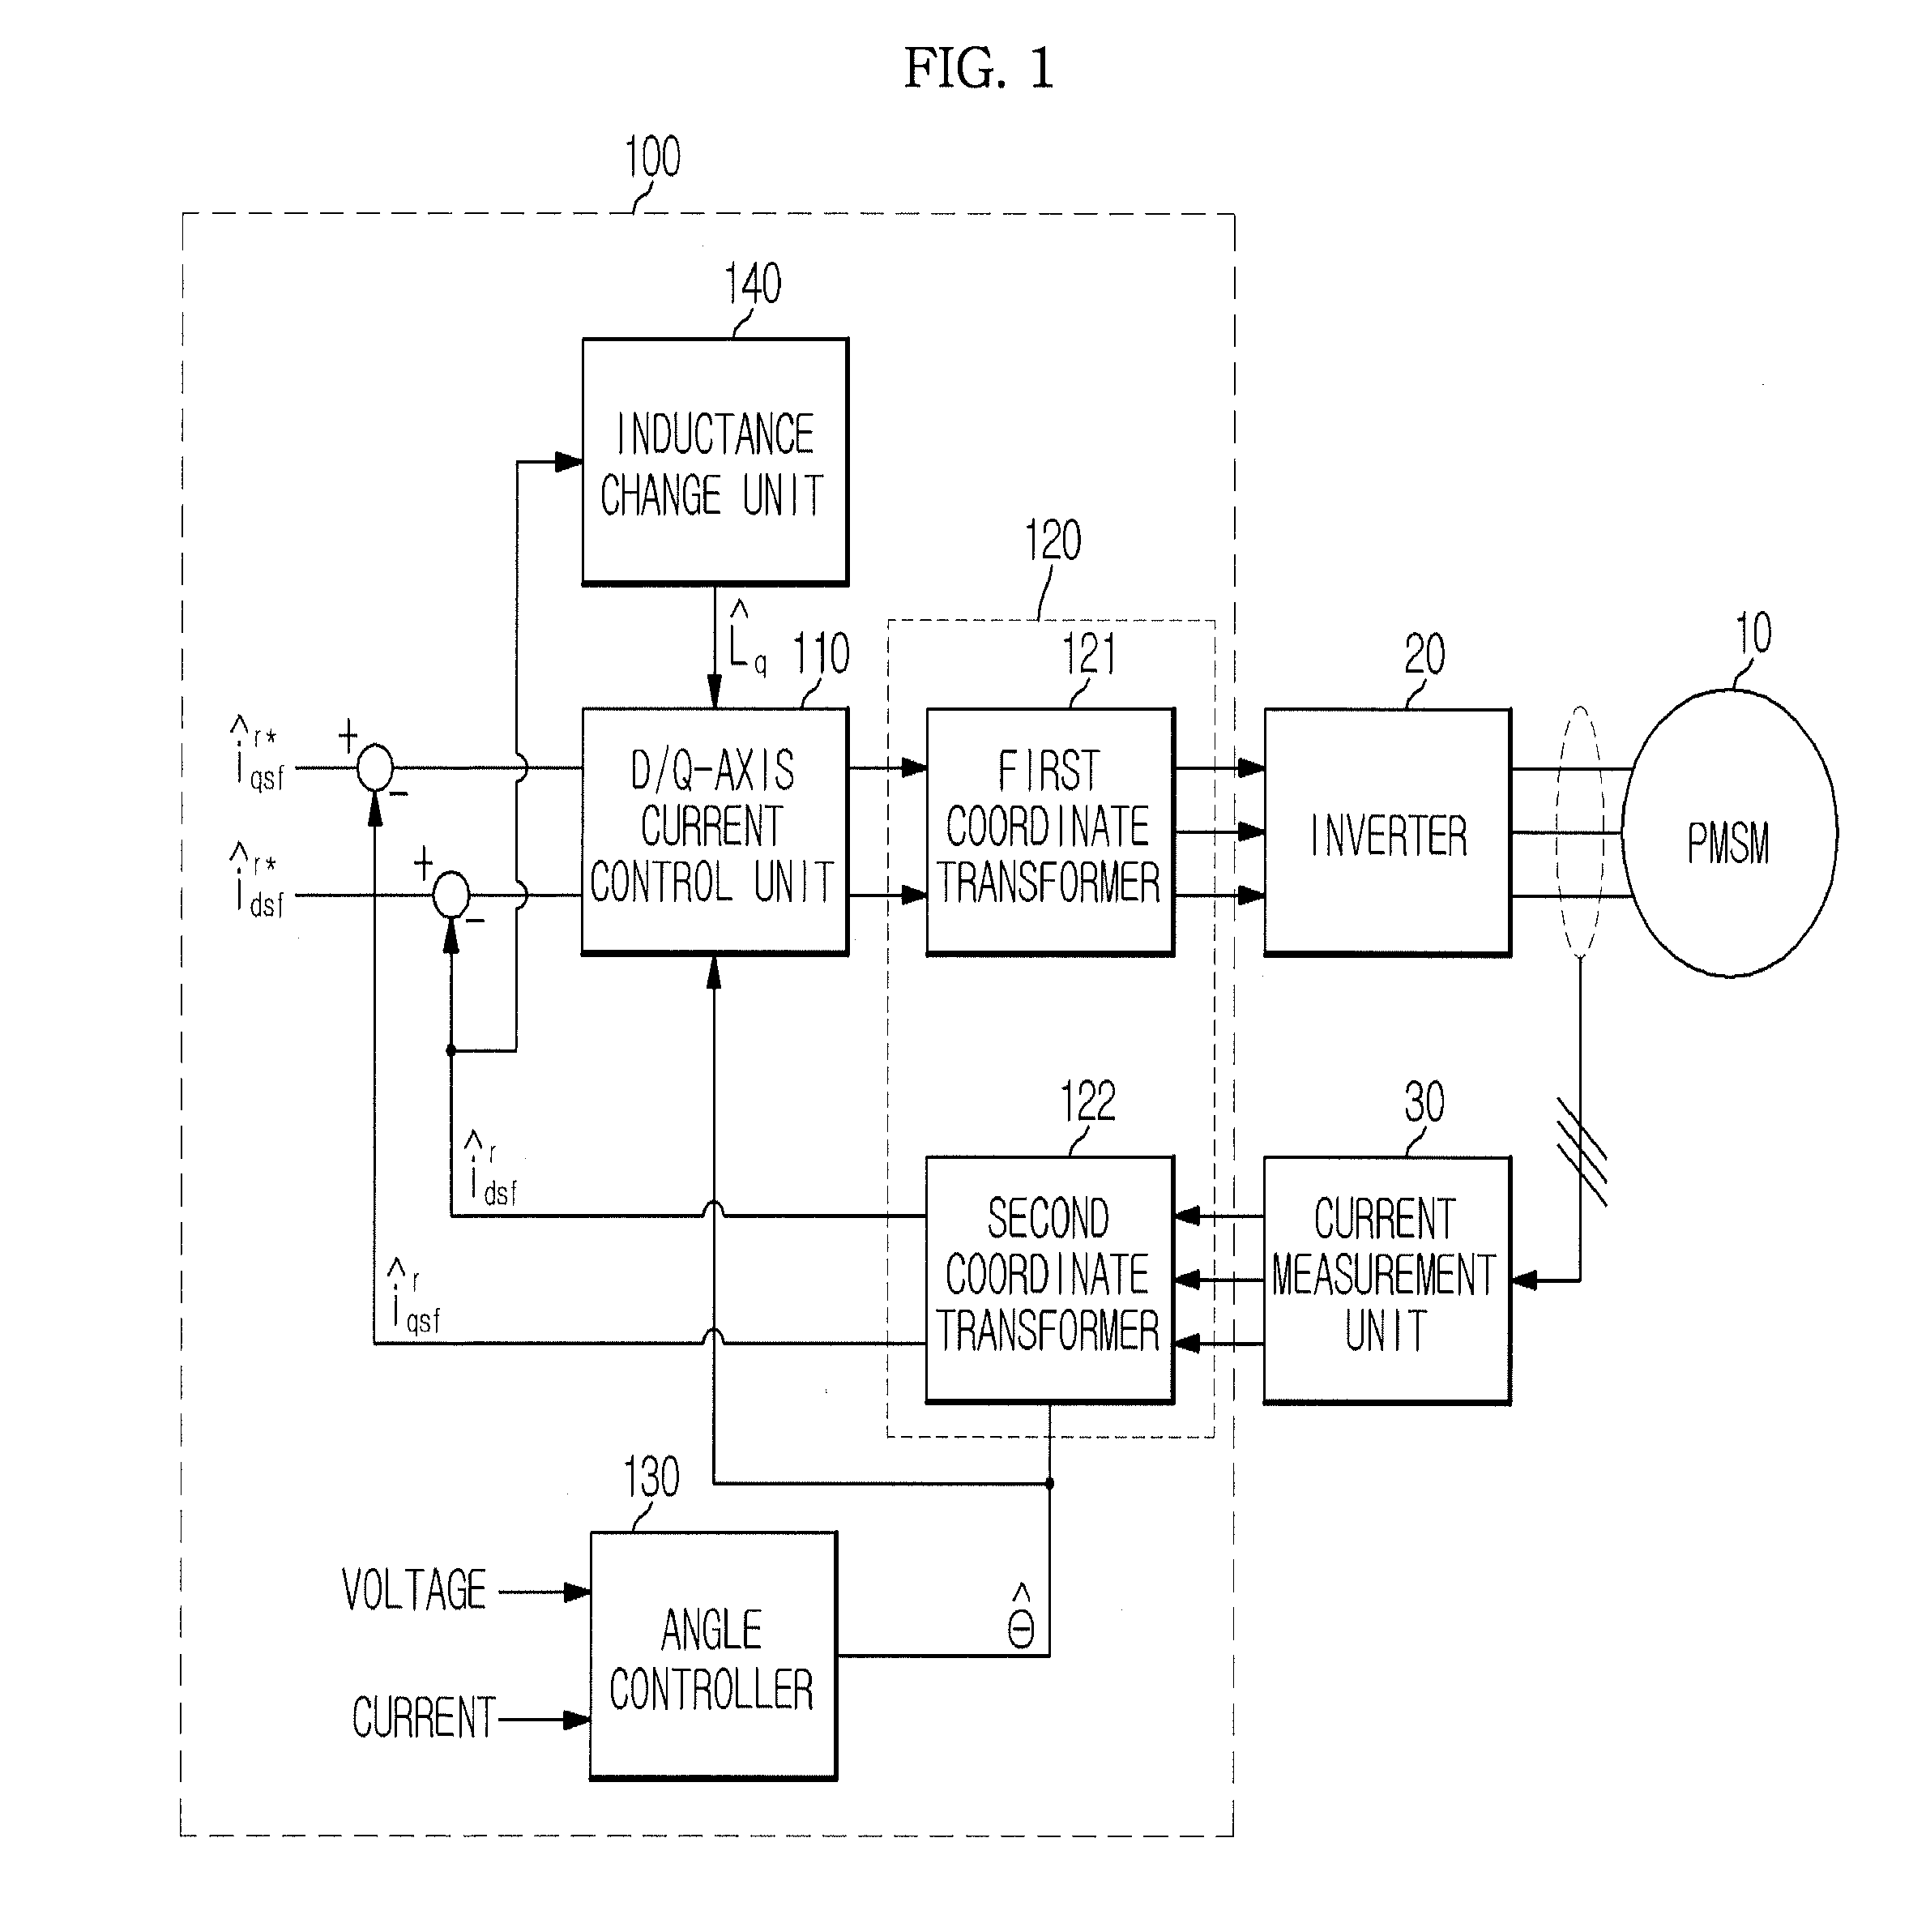 Apparatus and method of estimating inductance of permanent magnet synchronous motor